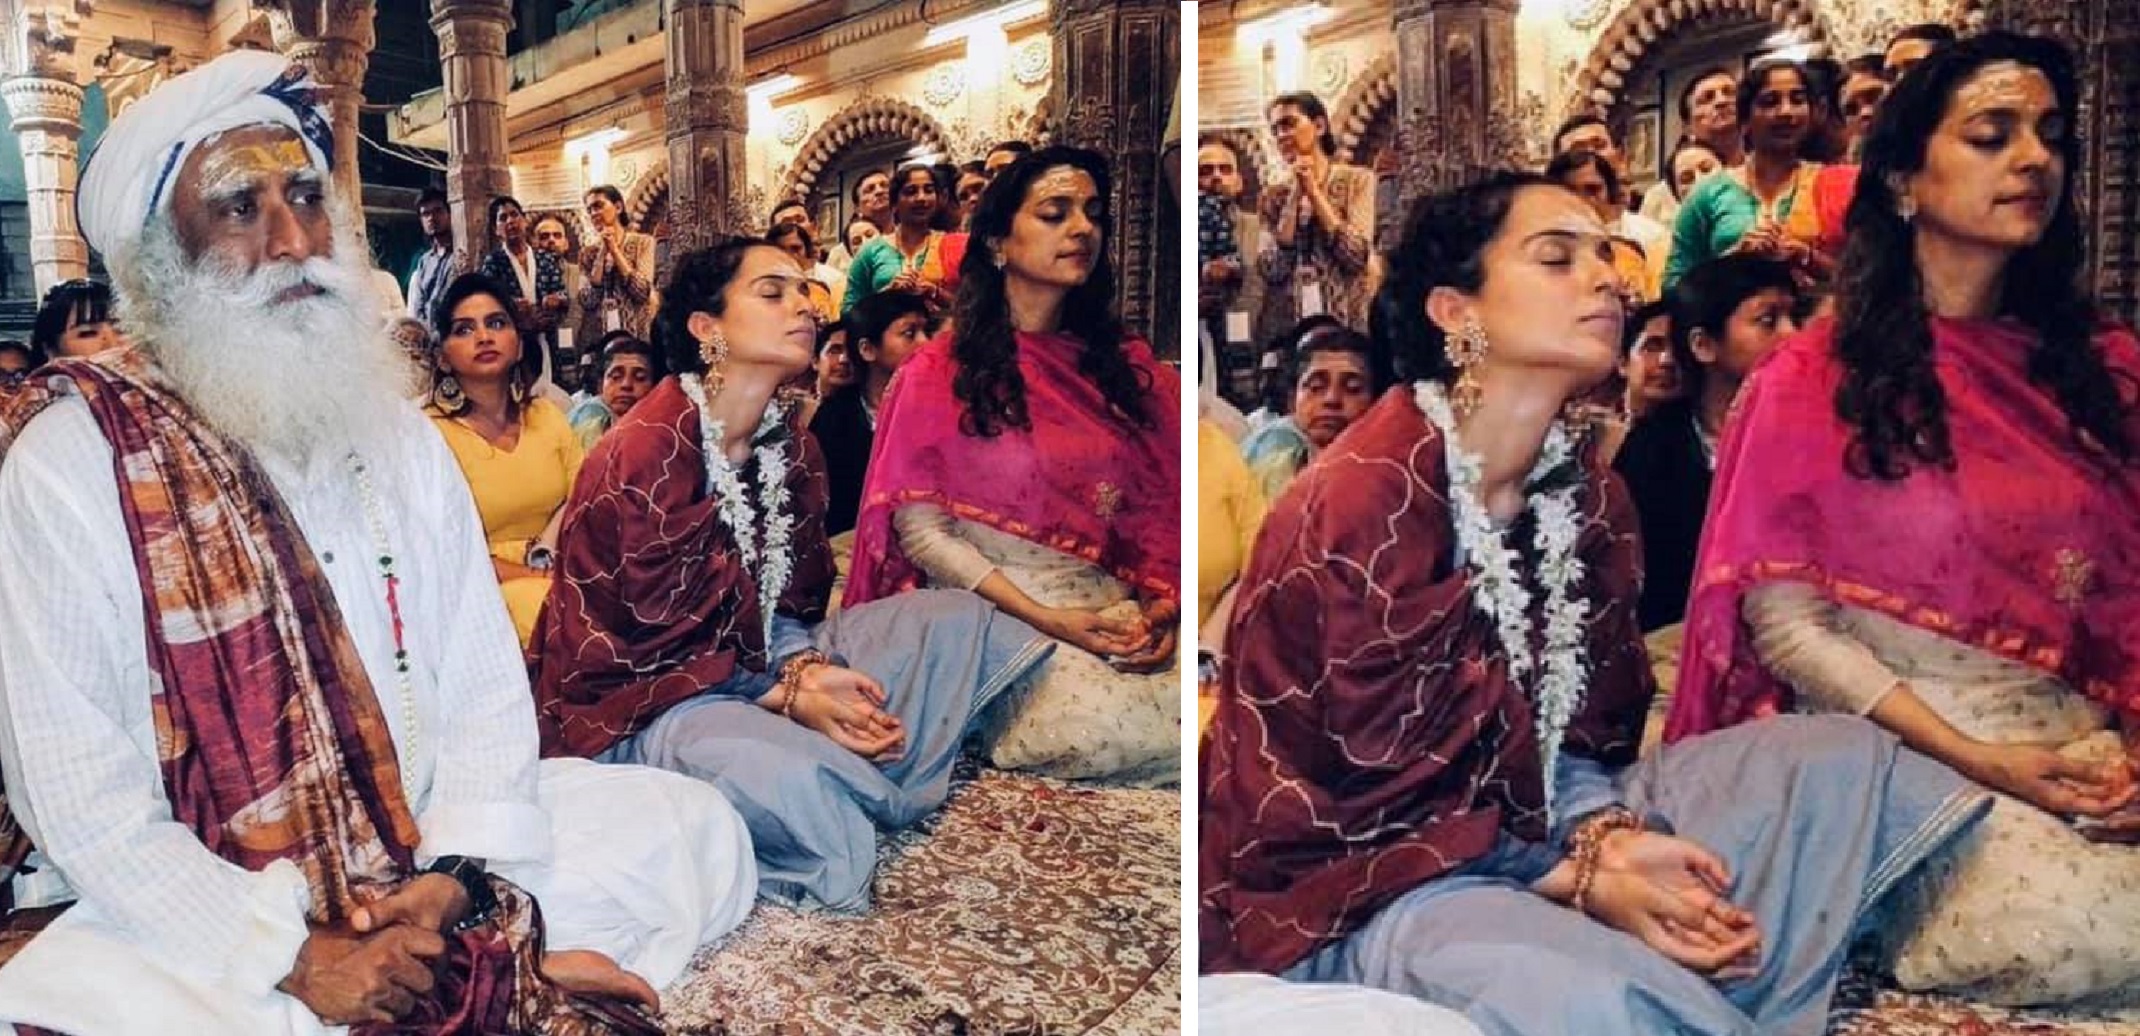 Kangana Ranaut is ‘Lost In Devotion’ In This Throwback Pic From Kashi Vishvanath